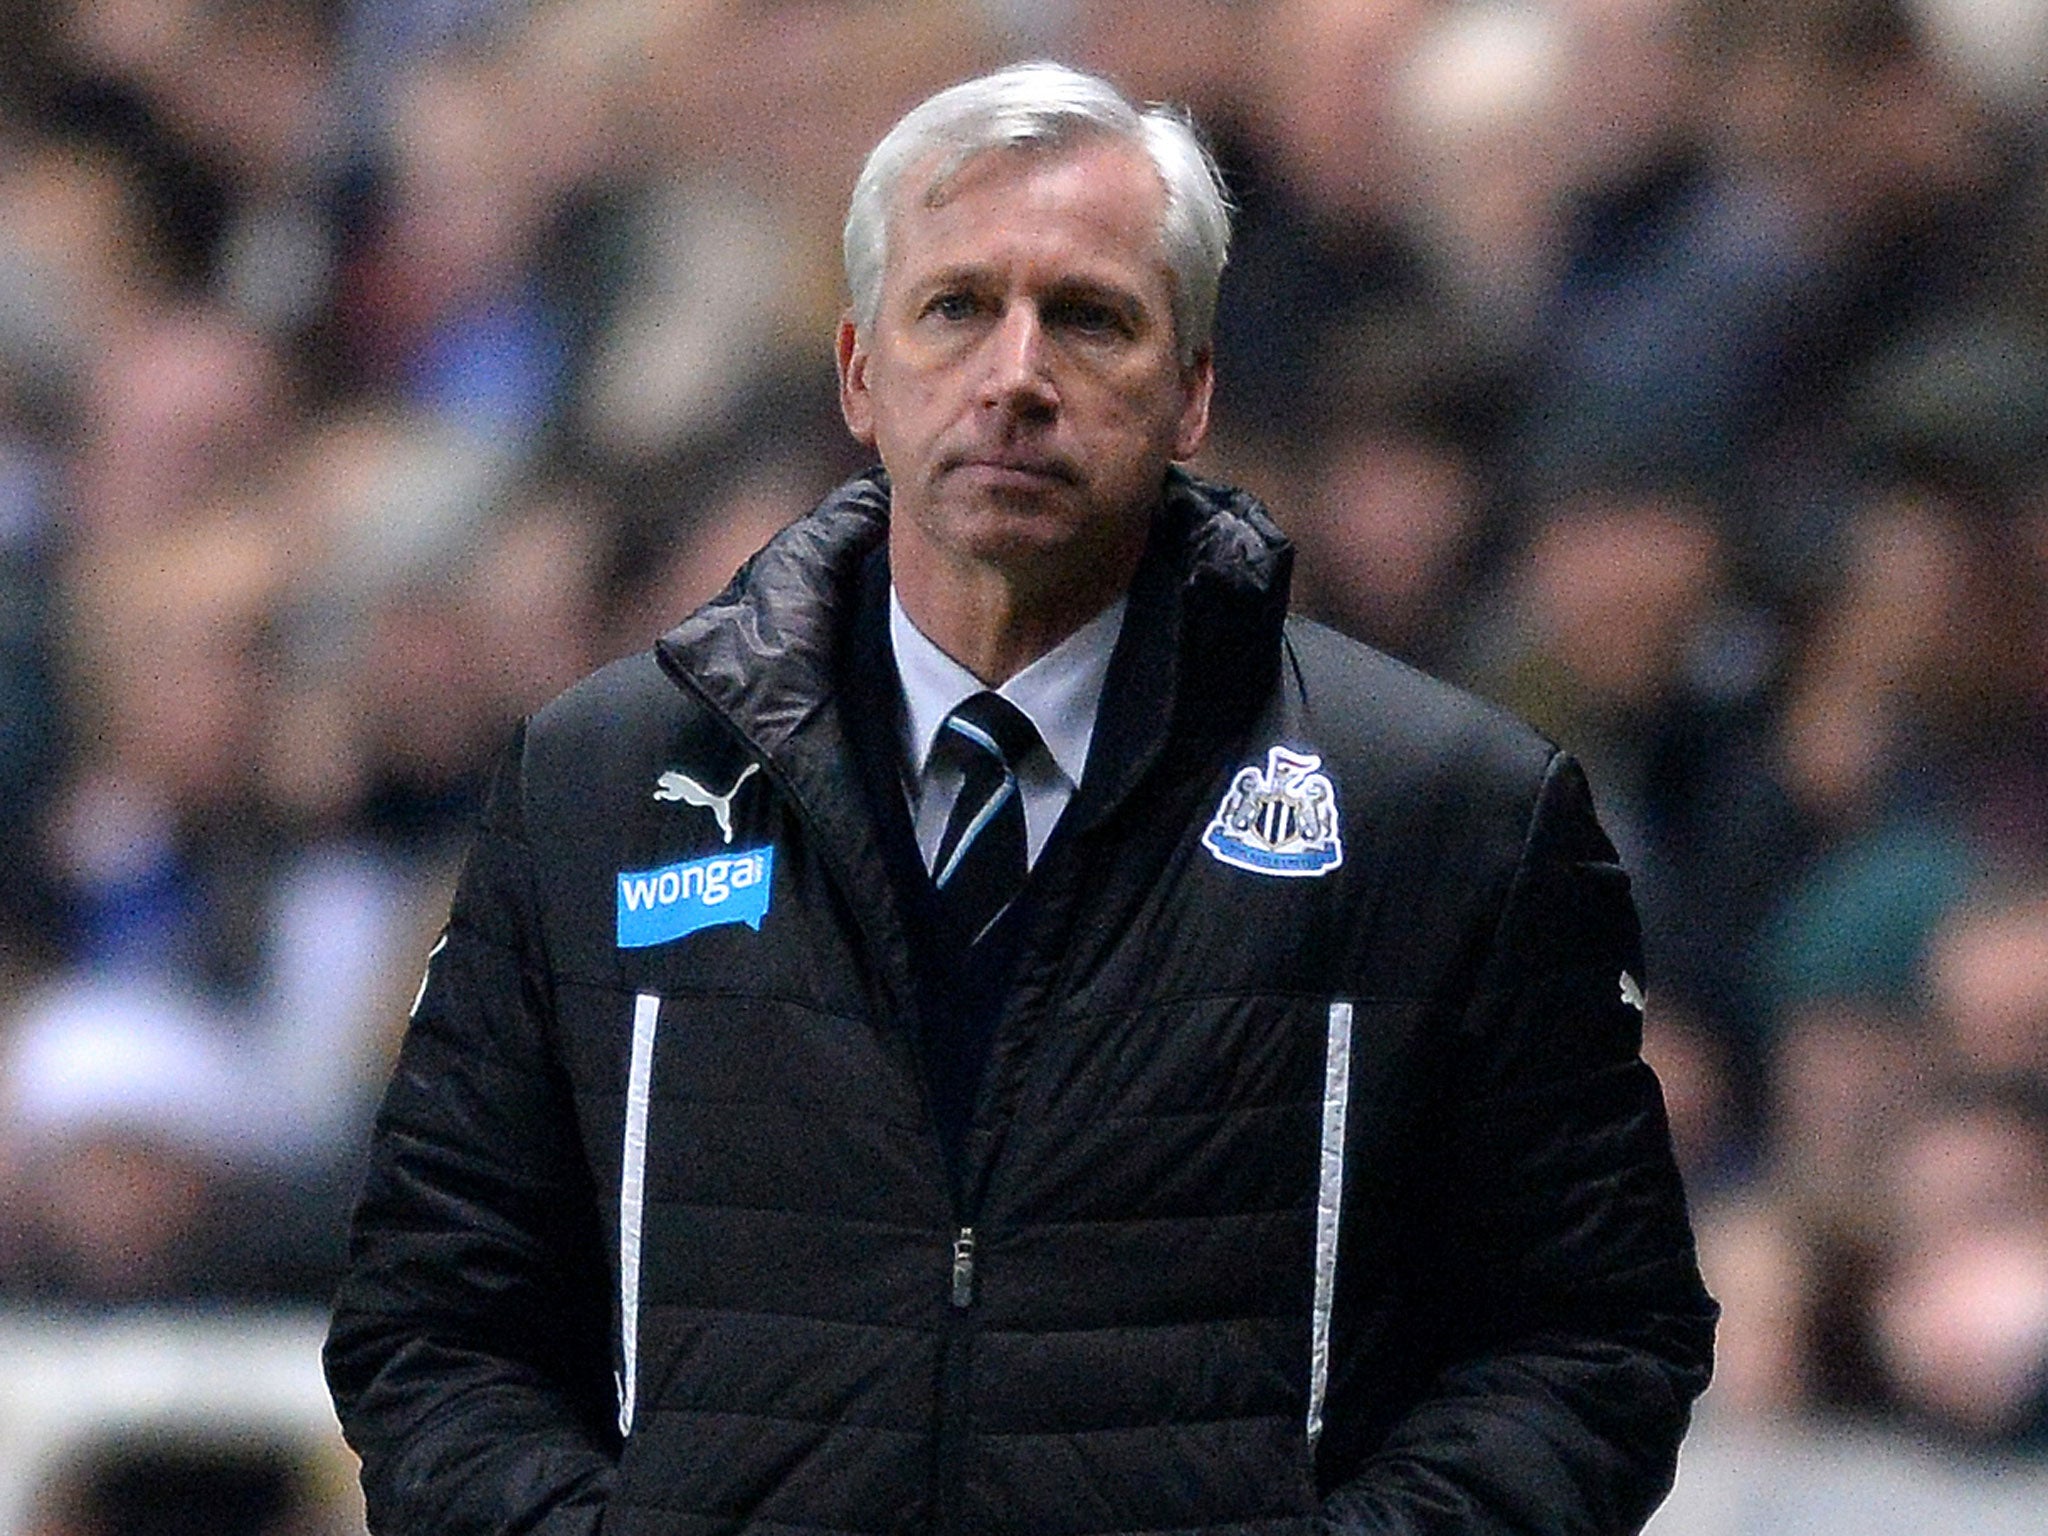 Alan Pardew's Newcastle suffered a 2-1 defeat by Cardiff in the FA Cup third round